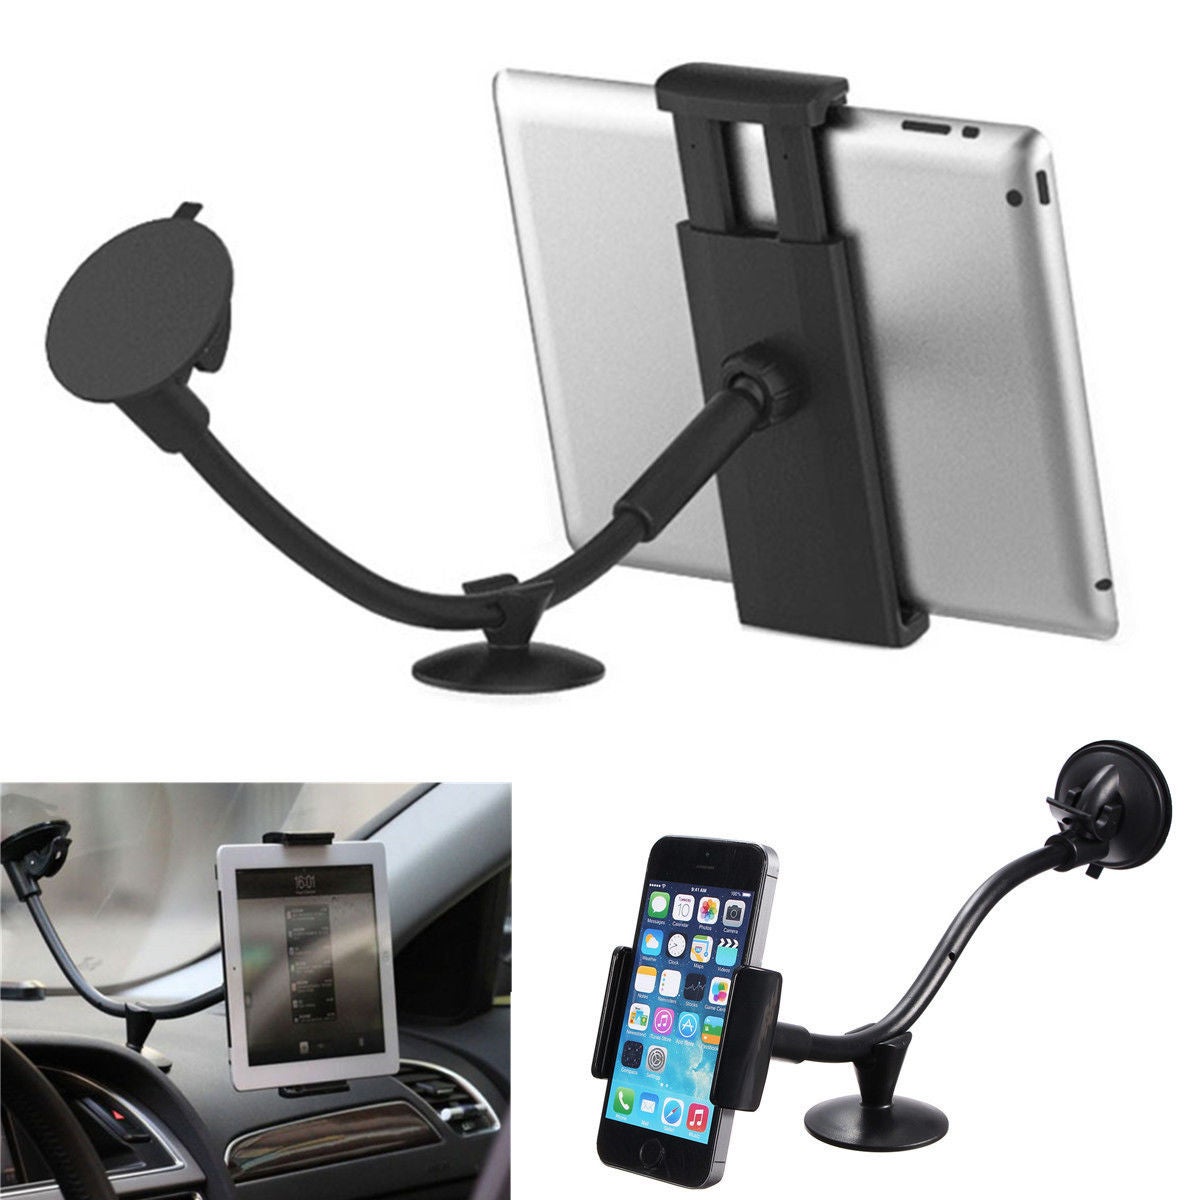 Universal 2 In 1 Car Windsheild Mount Holder Stand Mobile Phone 5" Tablet Pc 7"